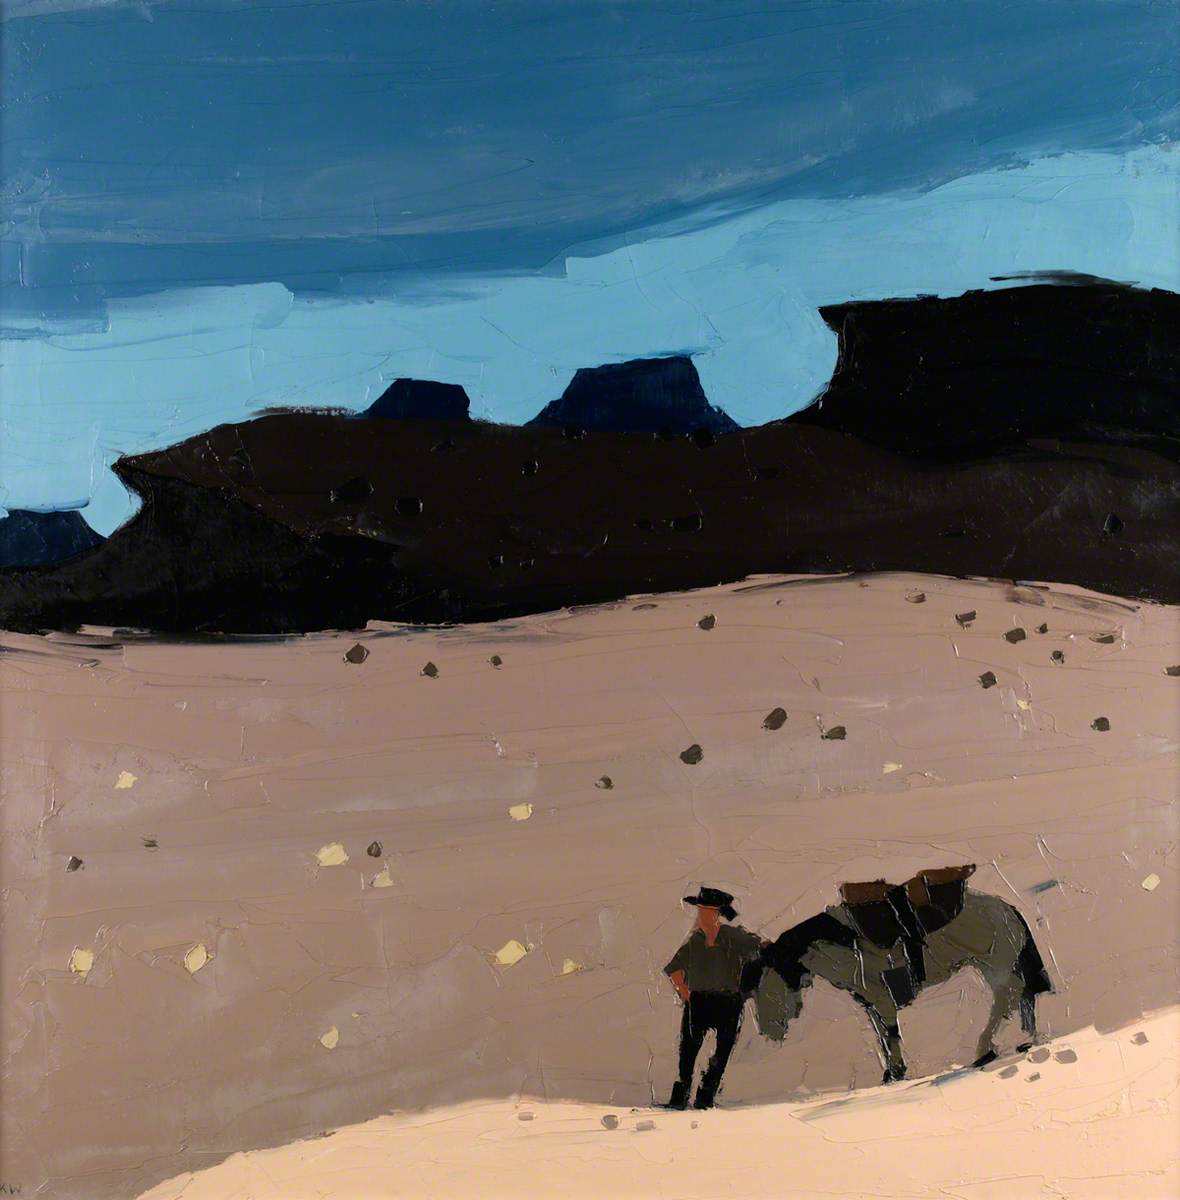 Man and Horse in the Desert